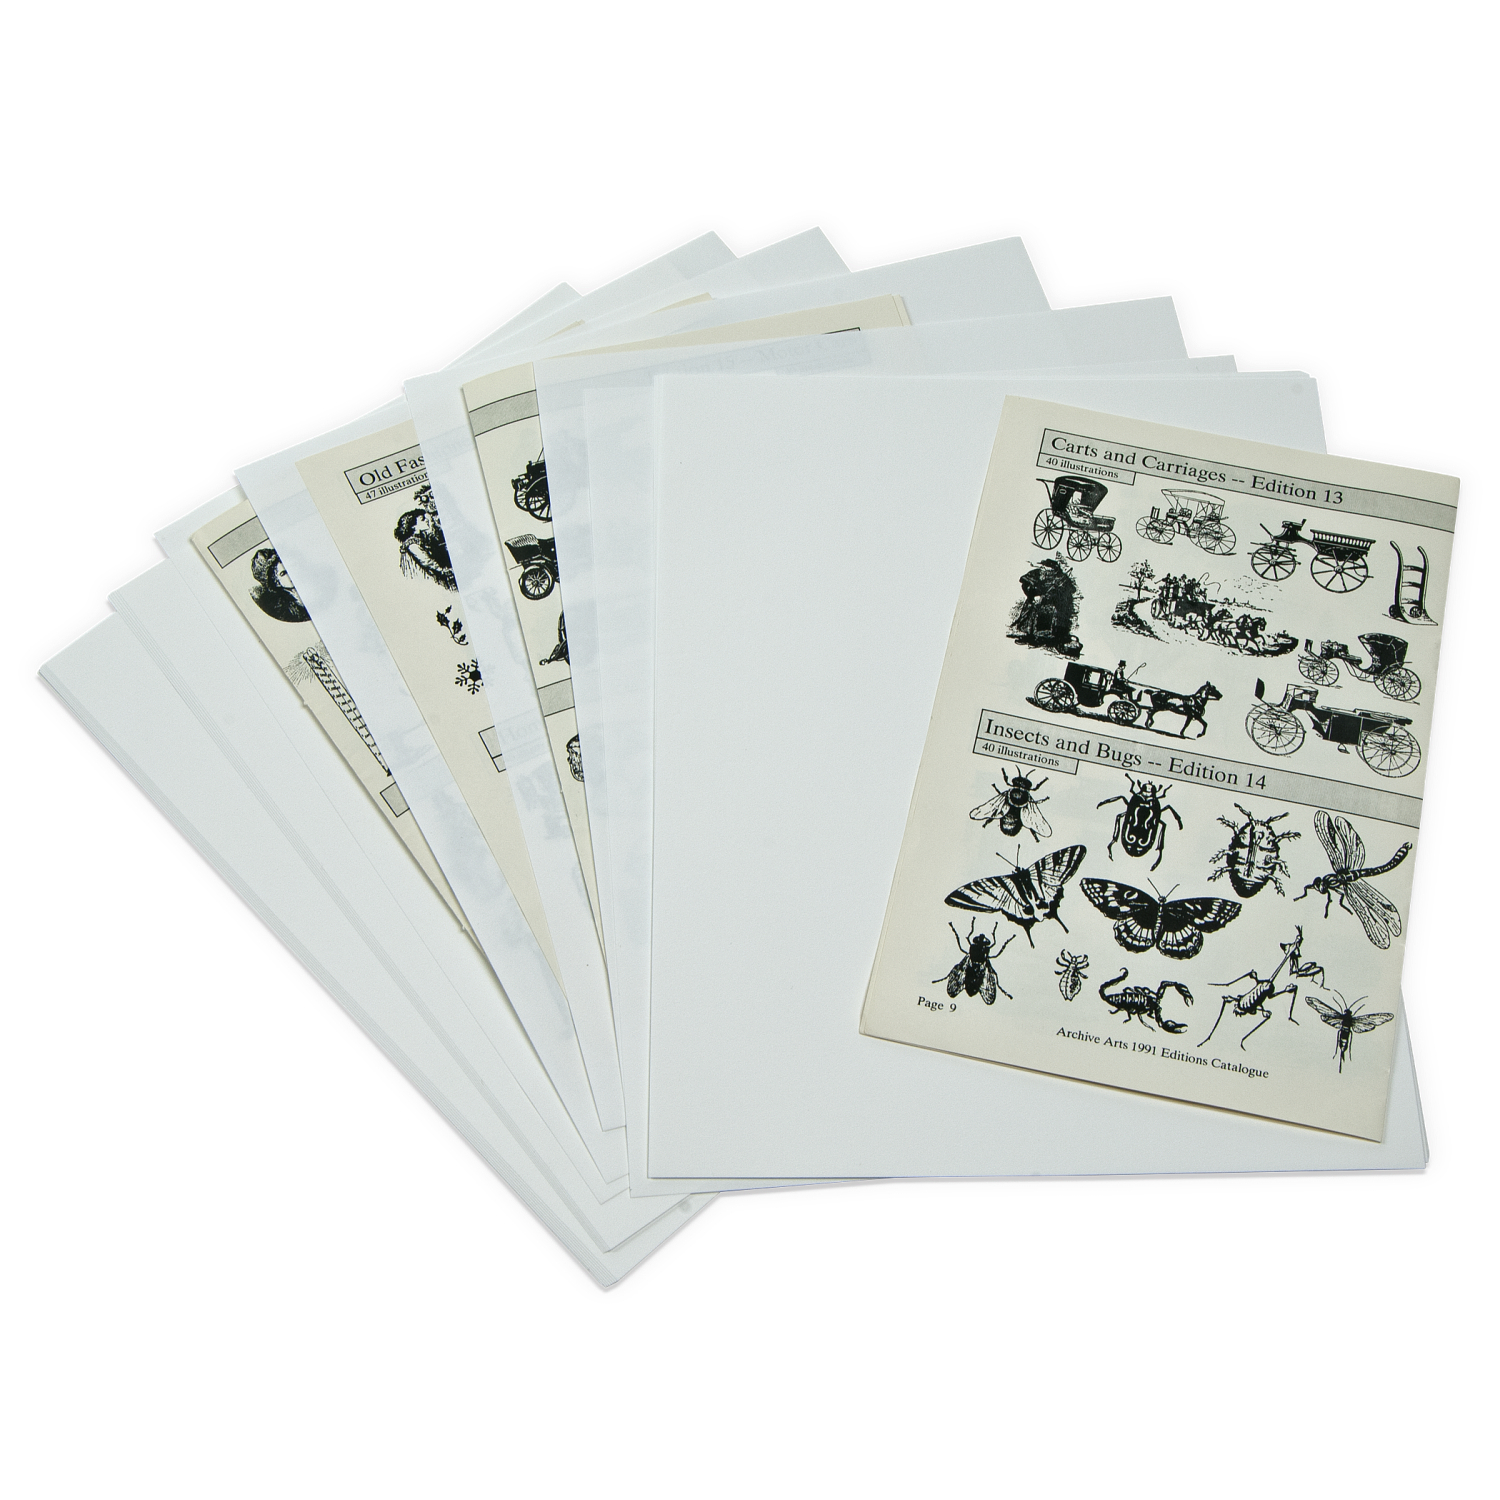 Gaylord Archival® Letter Size Document Storage Kit